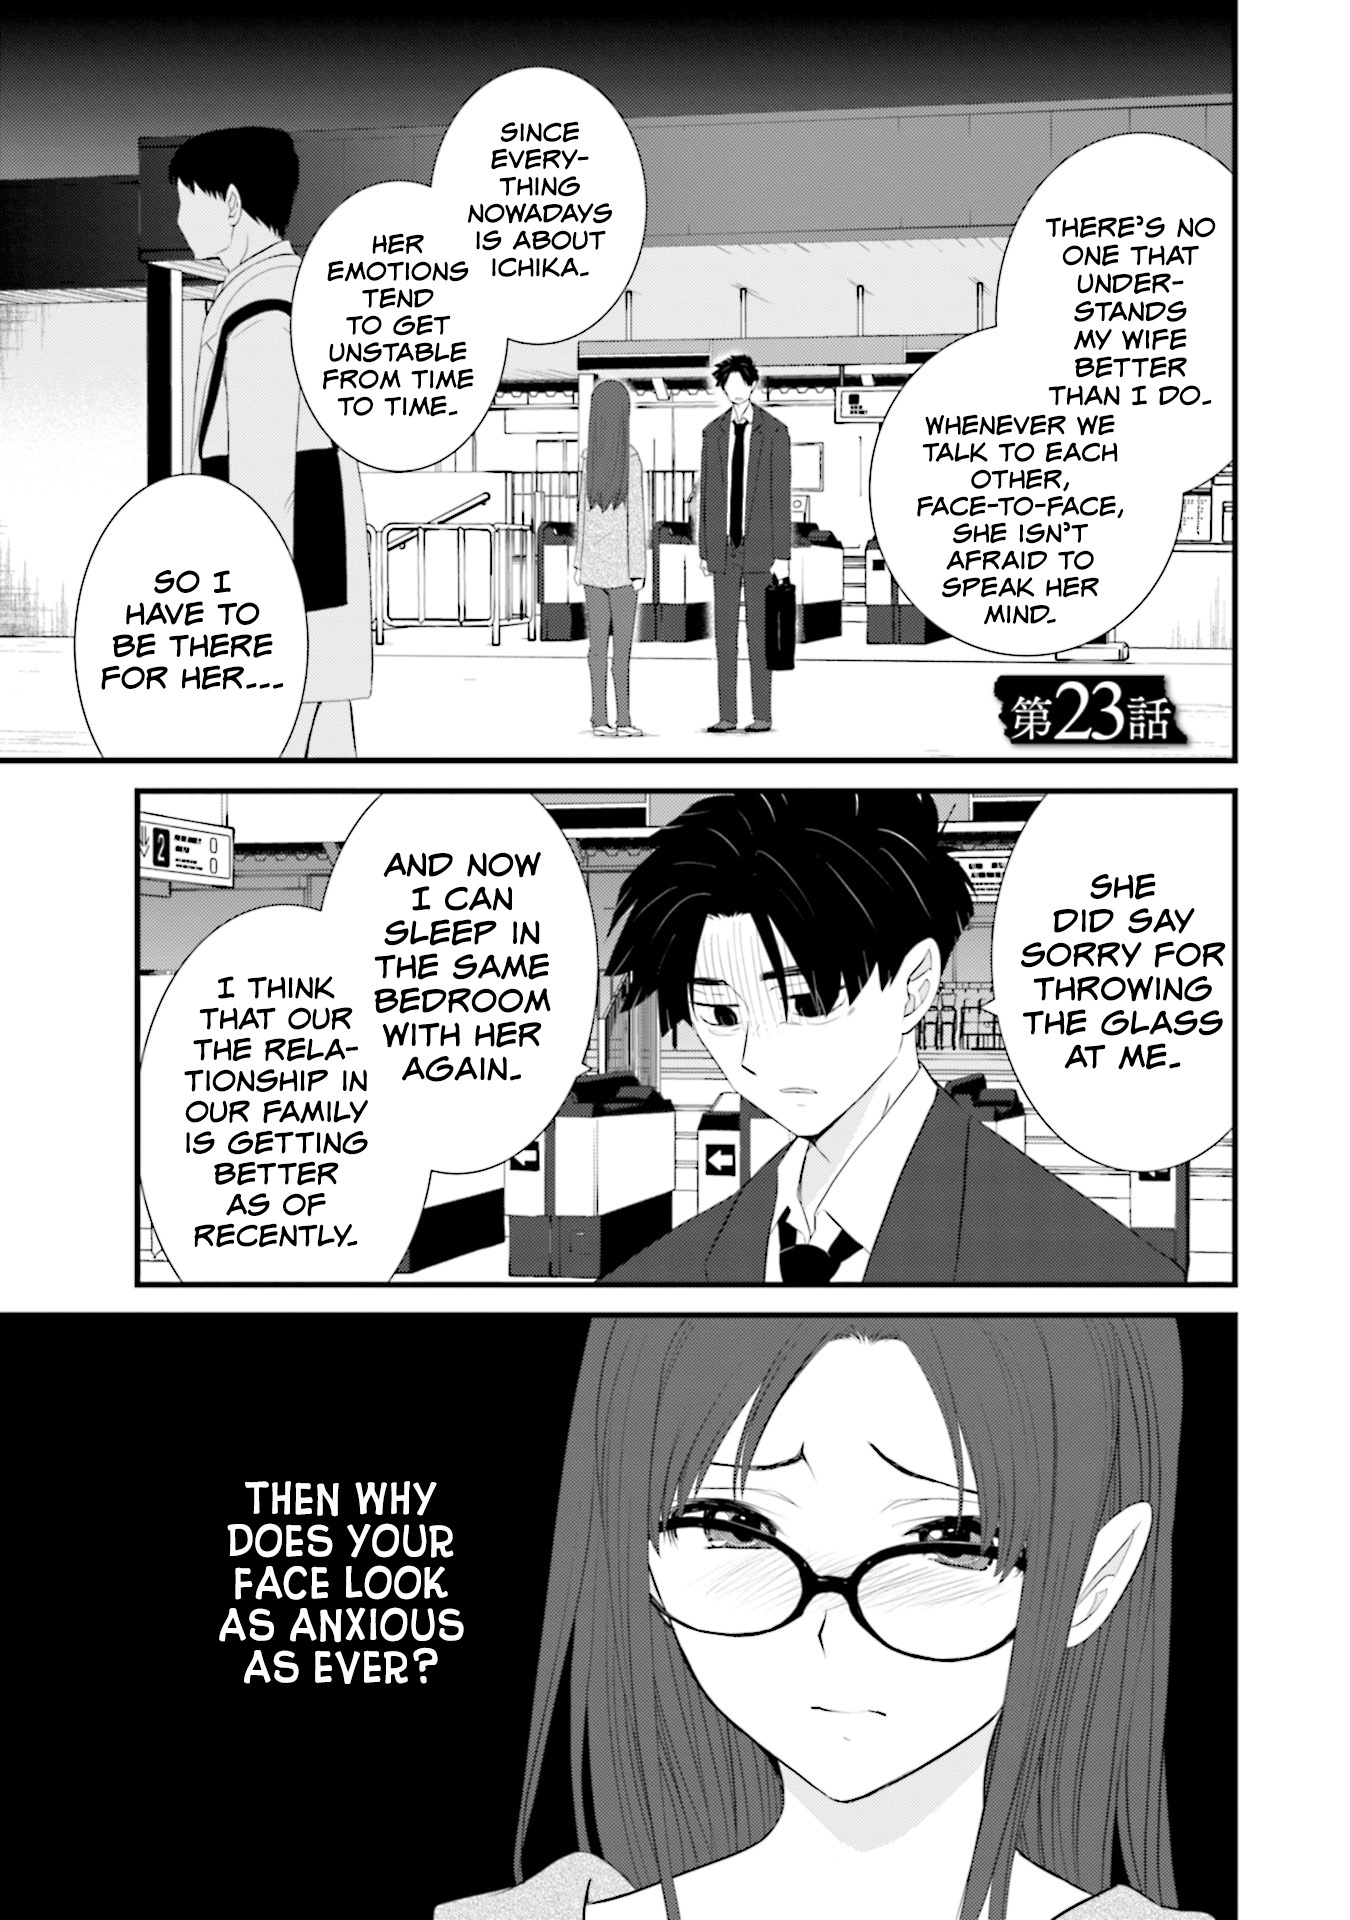 Is A Family Like This Worth Keeping? Vol.4 Chapter 23 - Picture 1